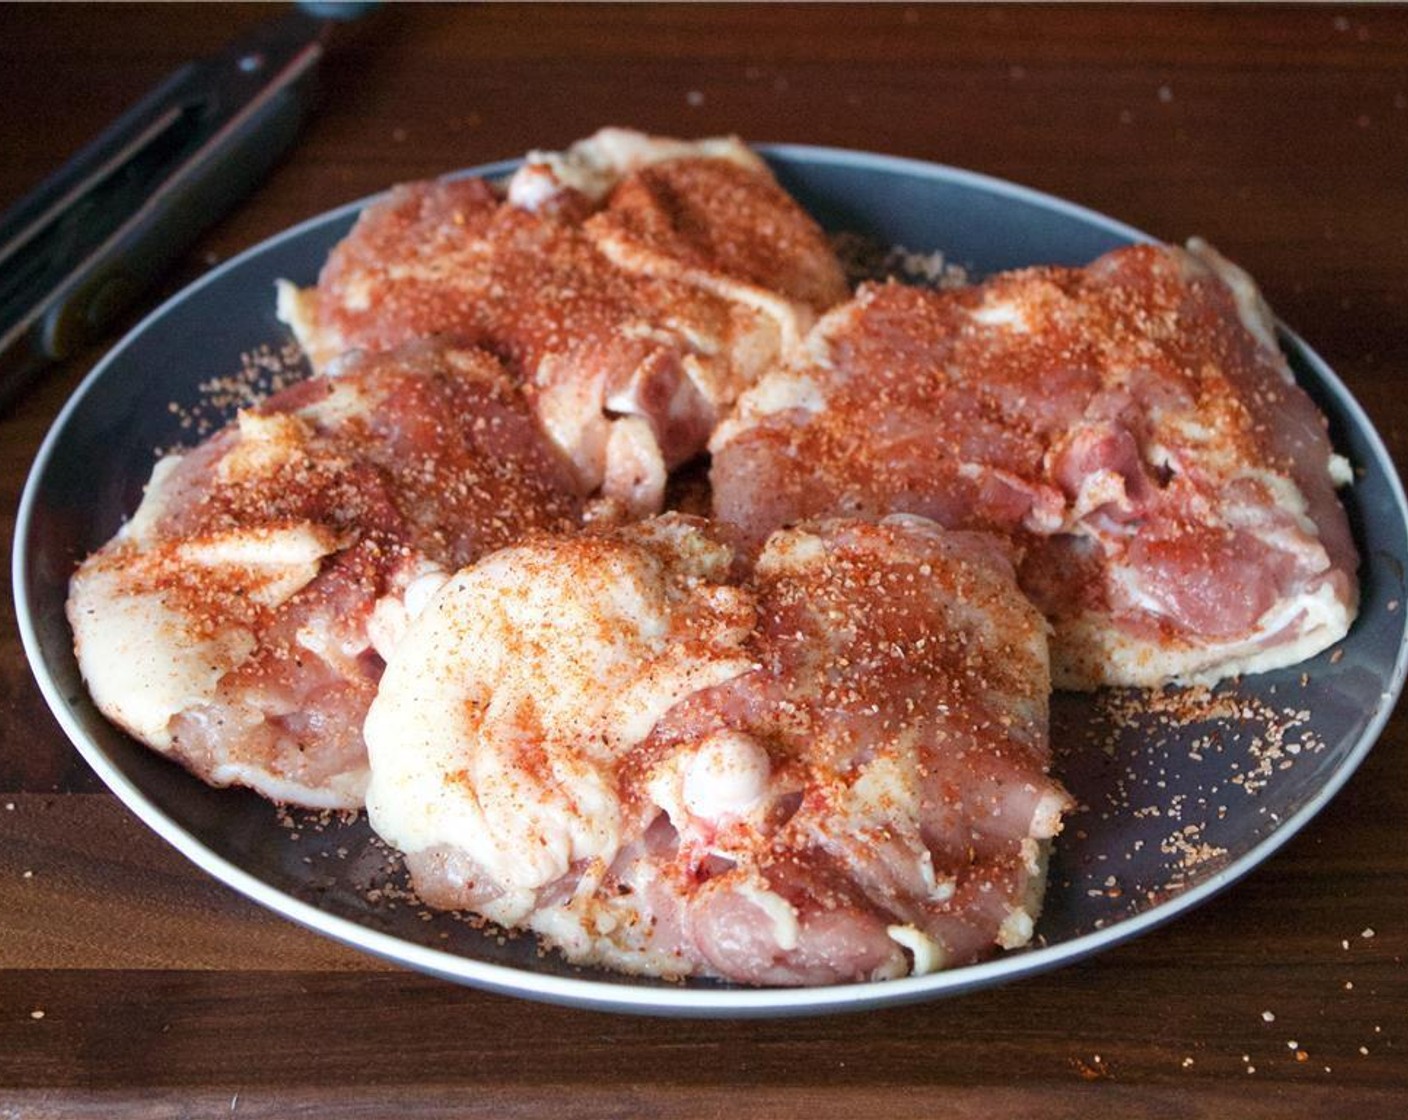 step 6 Combine the Kosher Salt (1 tsp), crushed Ground Black Pepper (1/2 tsp) and Smoked Paprika (1/2 tsp), and liberally season the Chicken Thighs (4) on both sides.